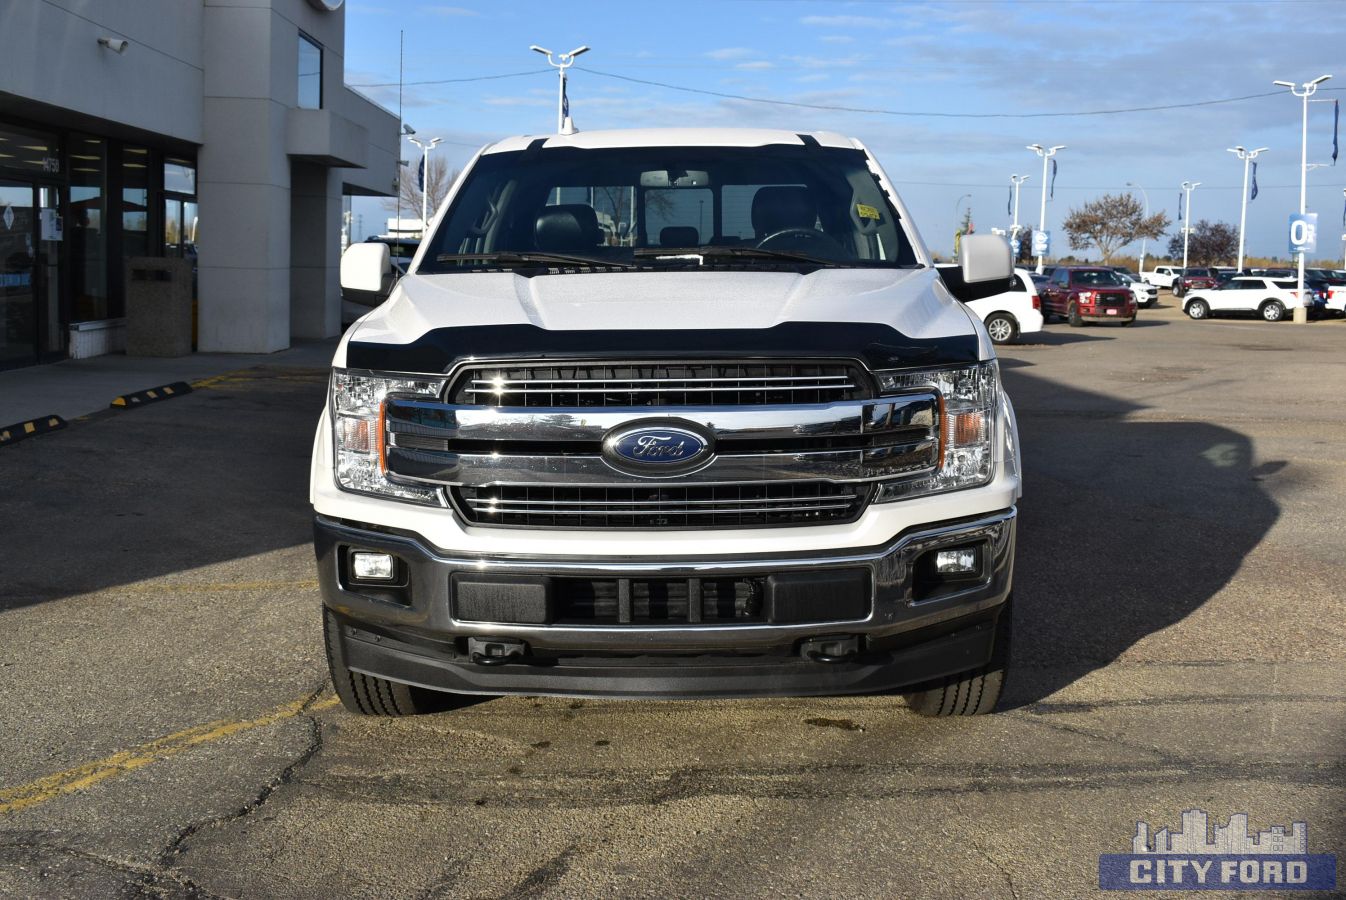 2018 Ford F-150 for sale in Edmonton, AB (1705280117) - The Car Guide 2018 Ford F 150 Lariat 5.0 Towing Capacity